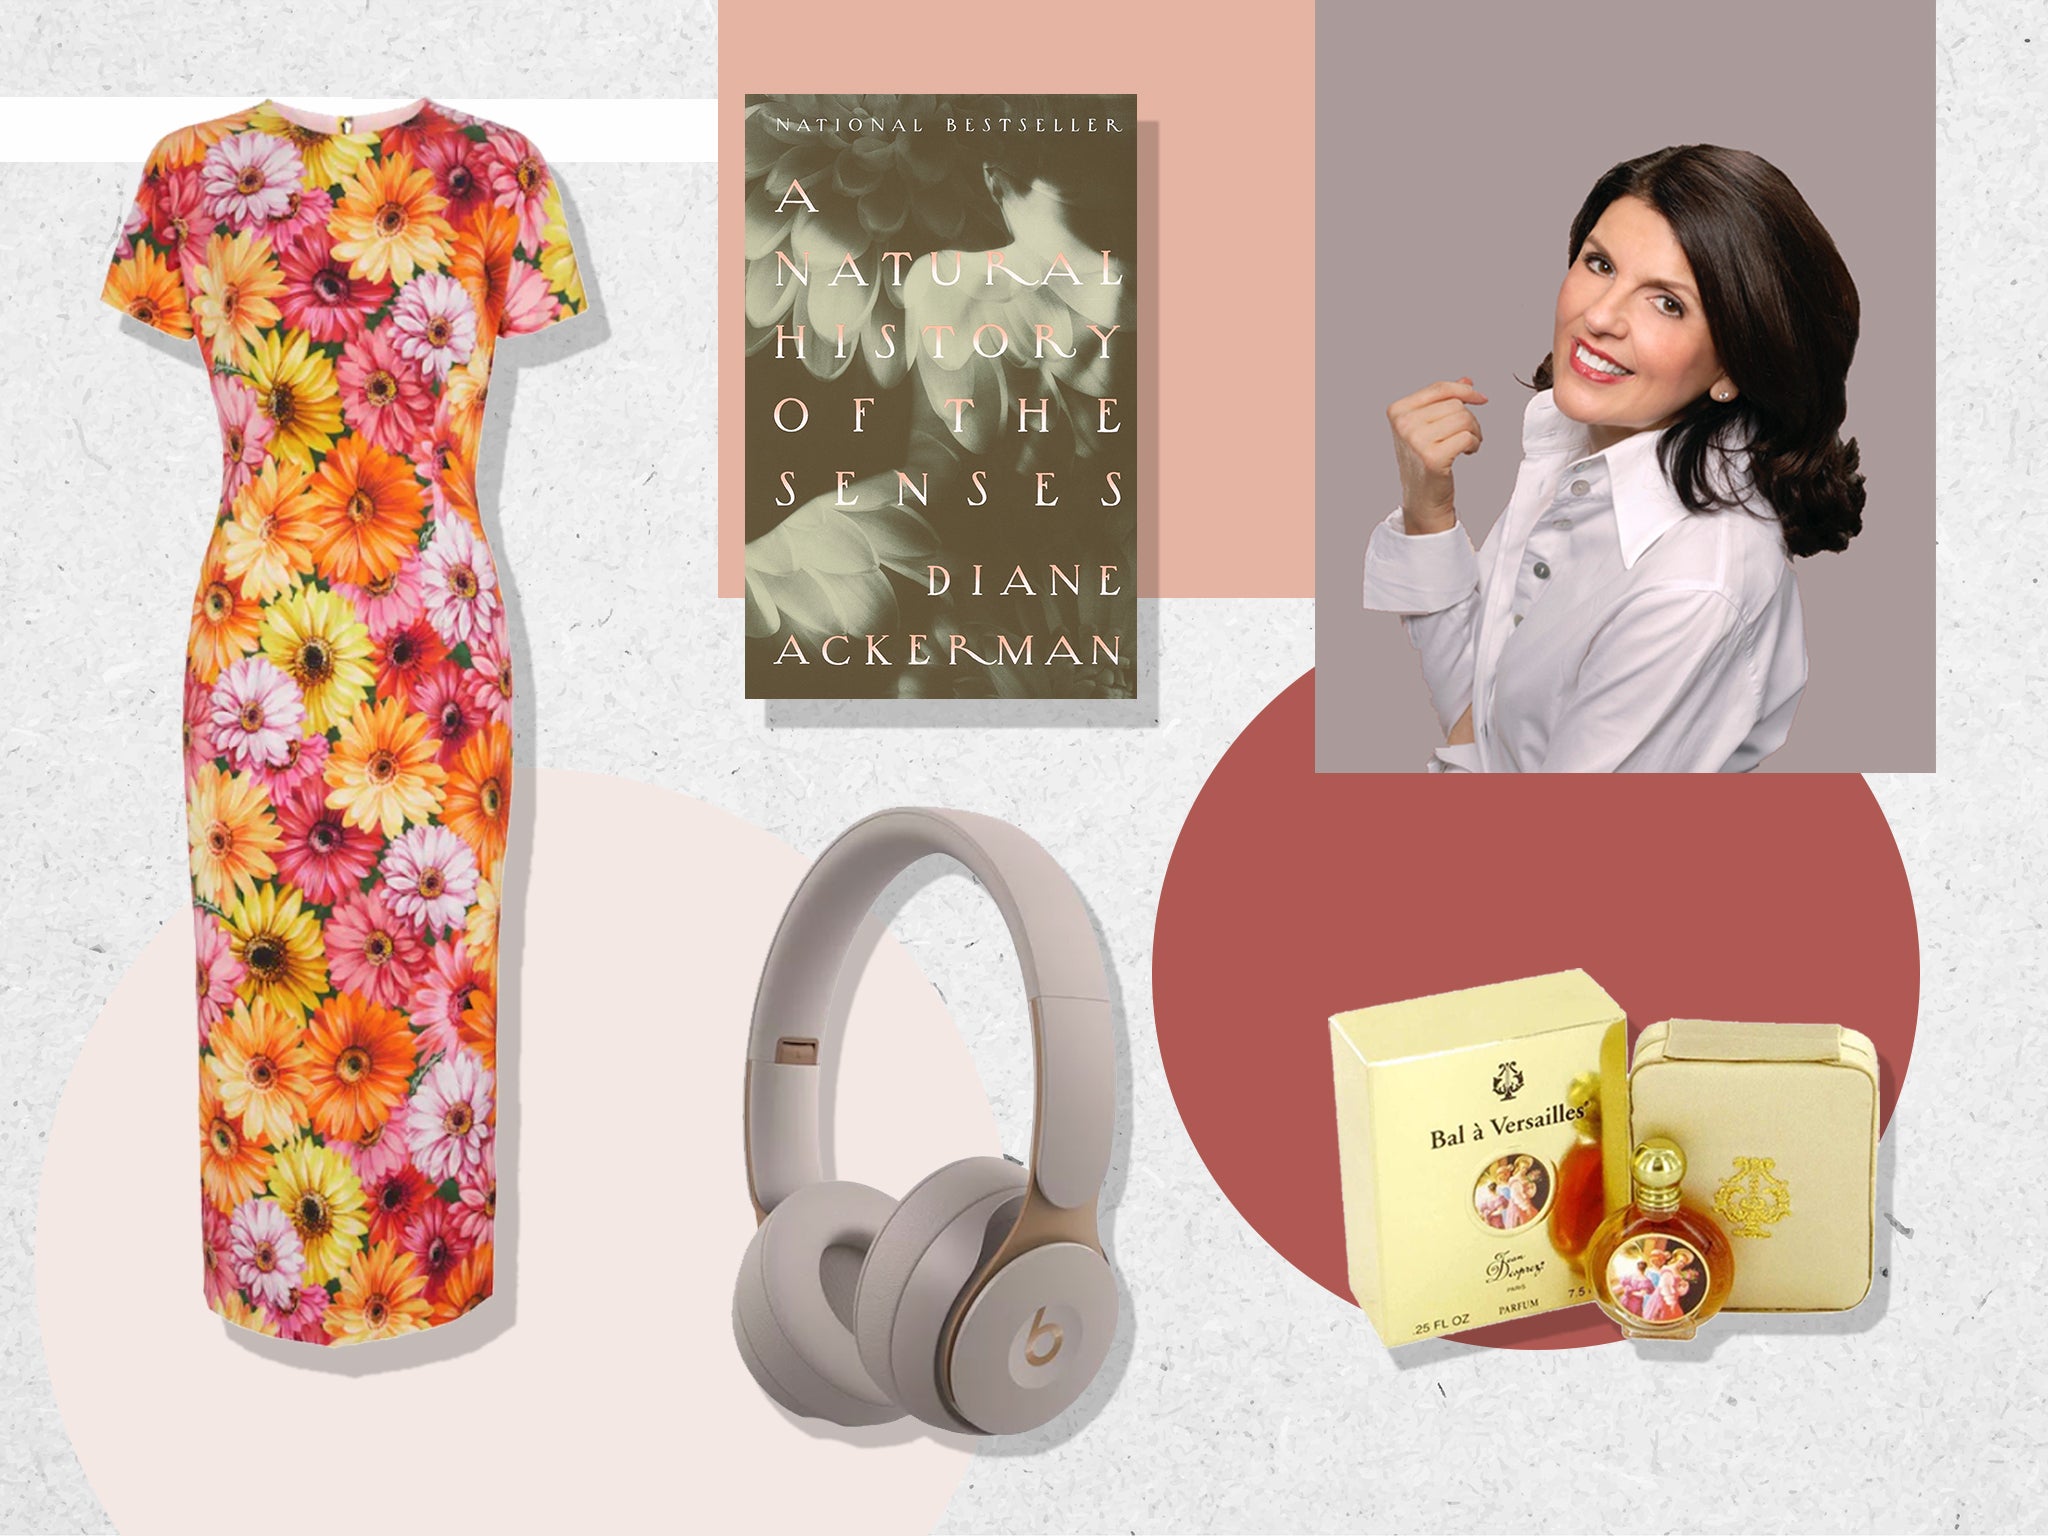 From headphones to pillows, these are Susan Miller’s top picks